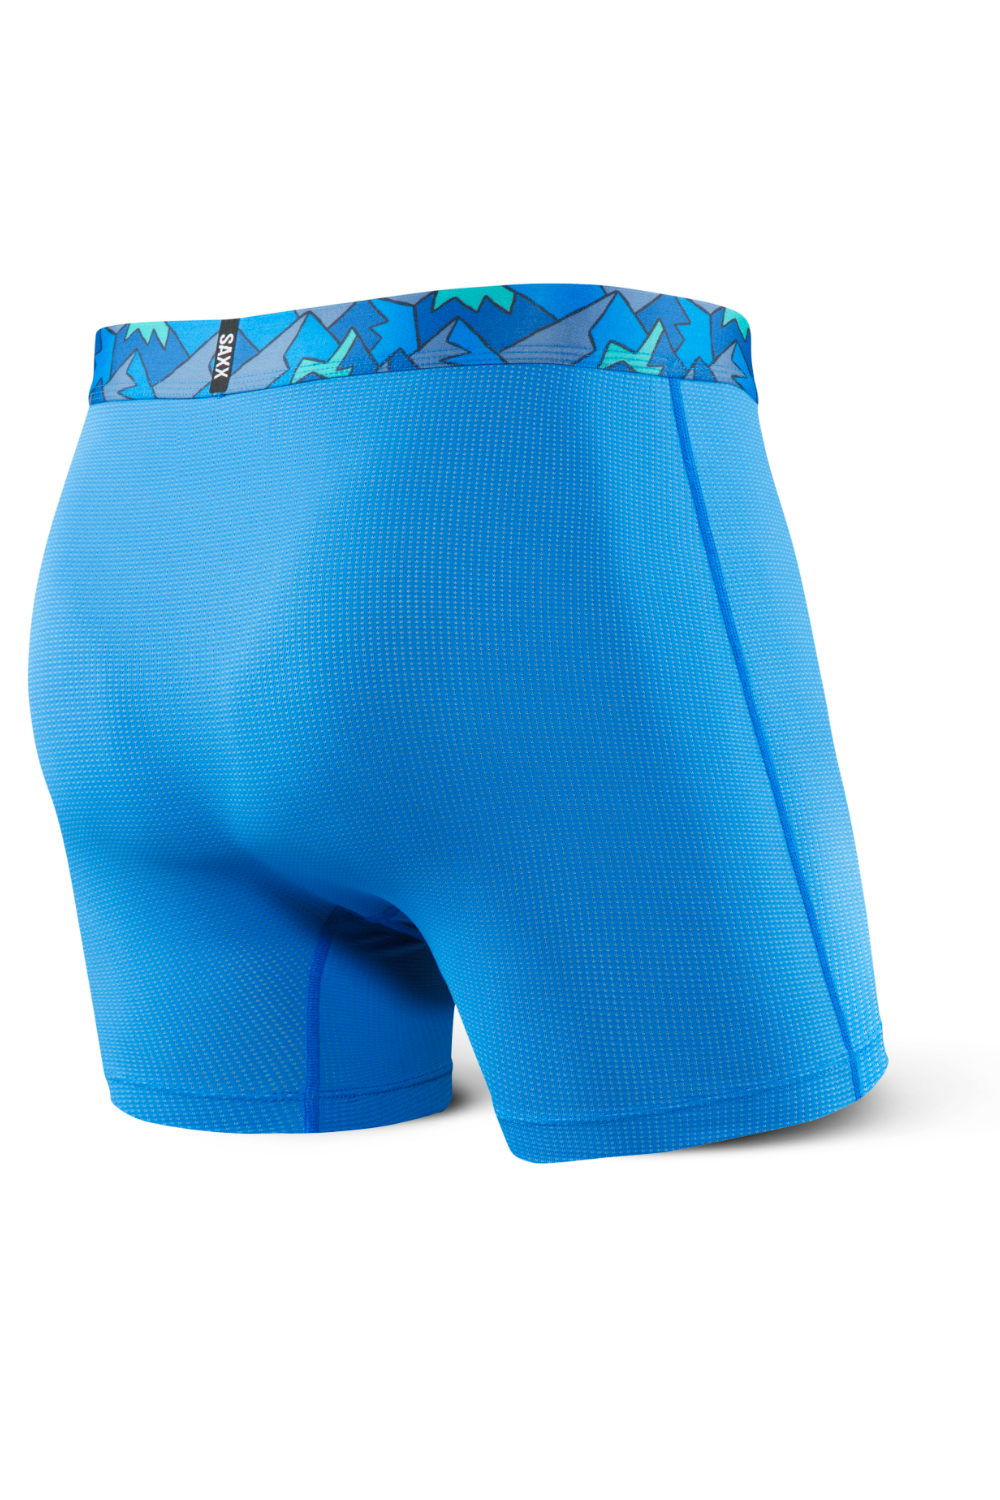 SAXX Quest 2.0 Boxer Fly Pure Blue